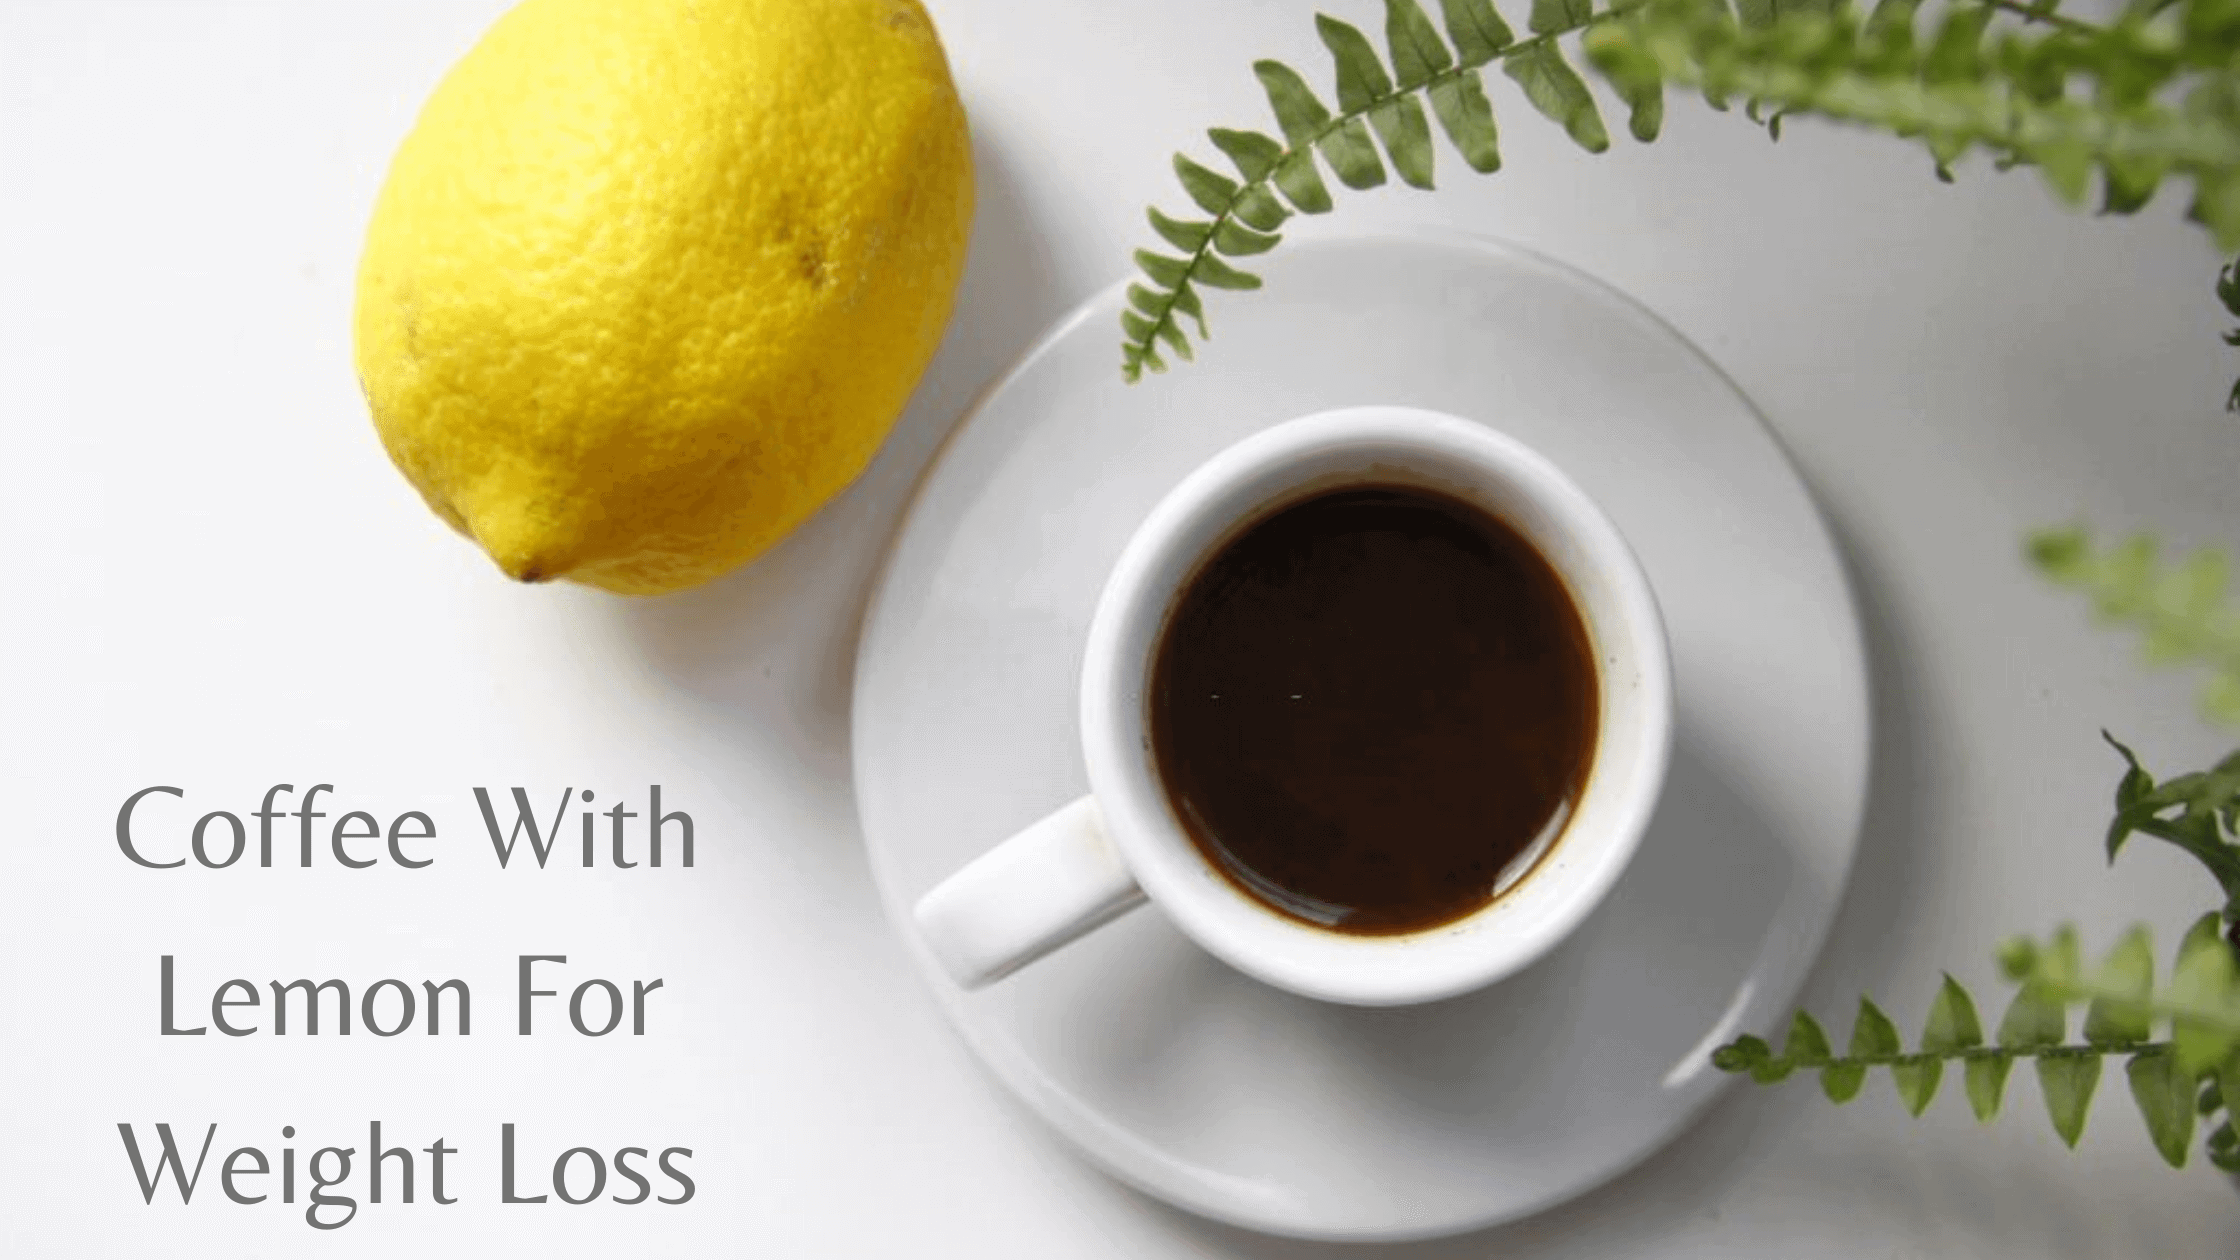 Coffee With Lemon For Weight Loss